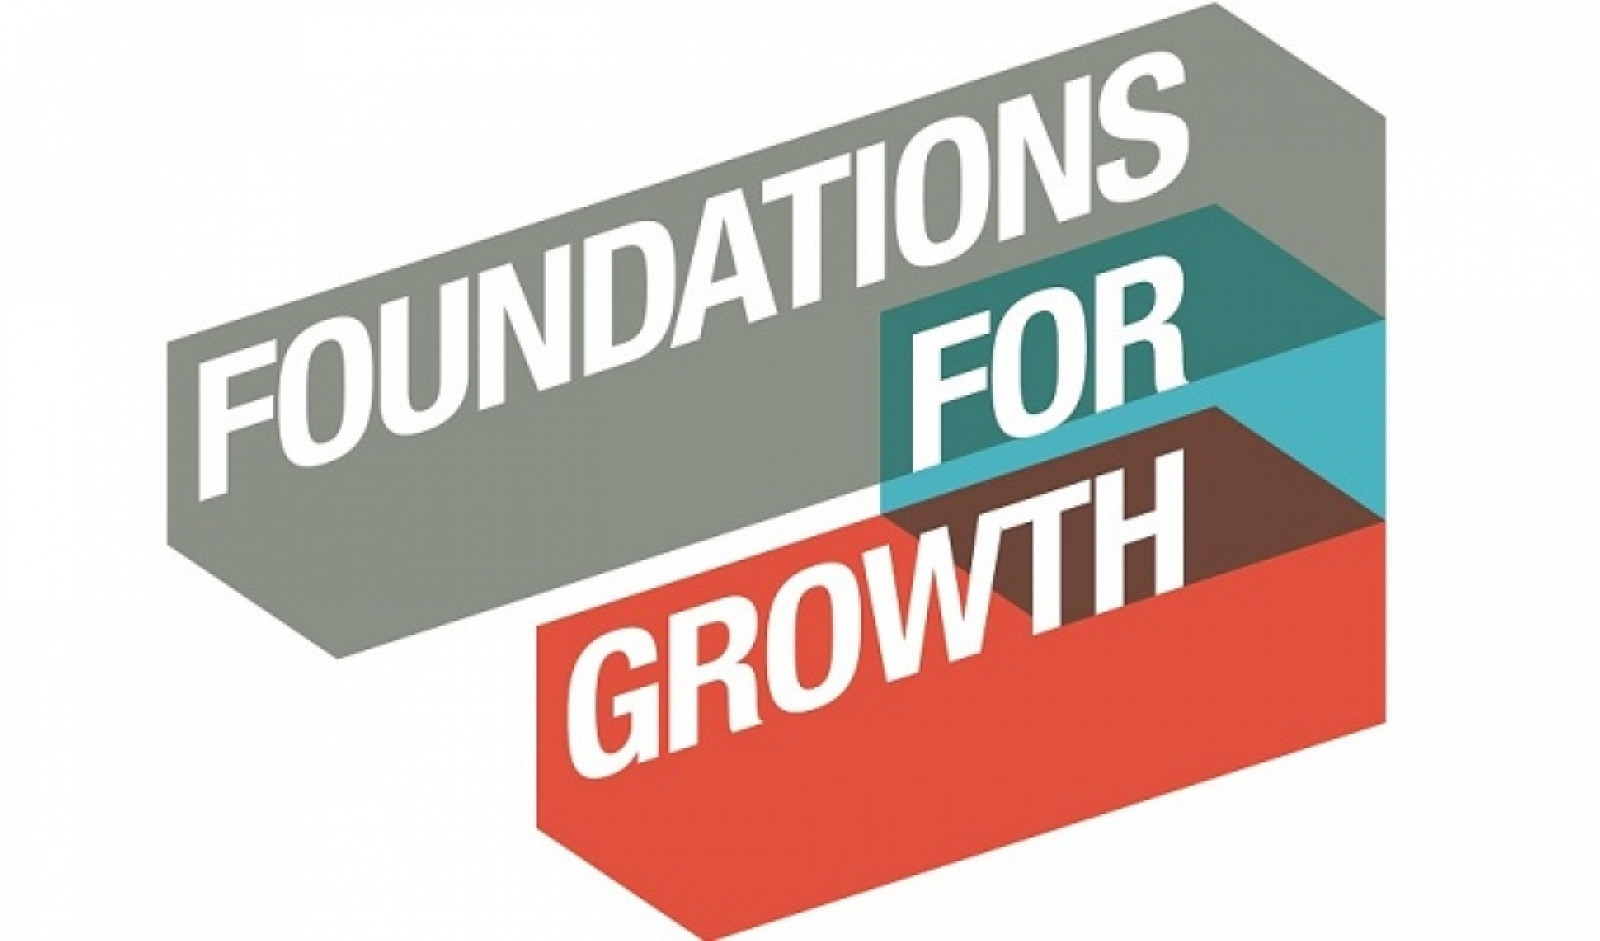 Foundations for Growth: A skills investment showca...